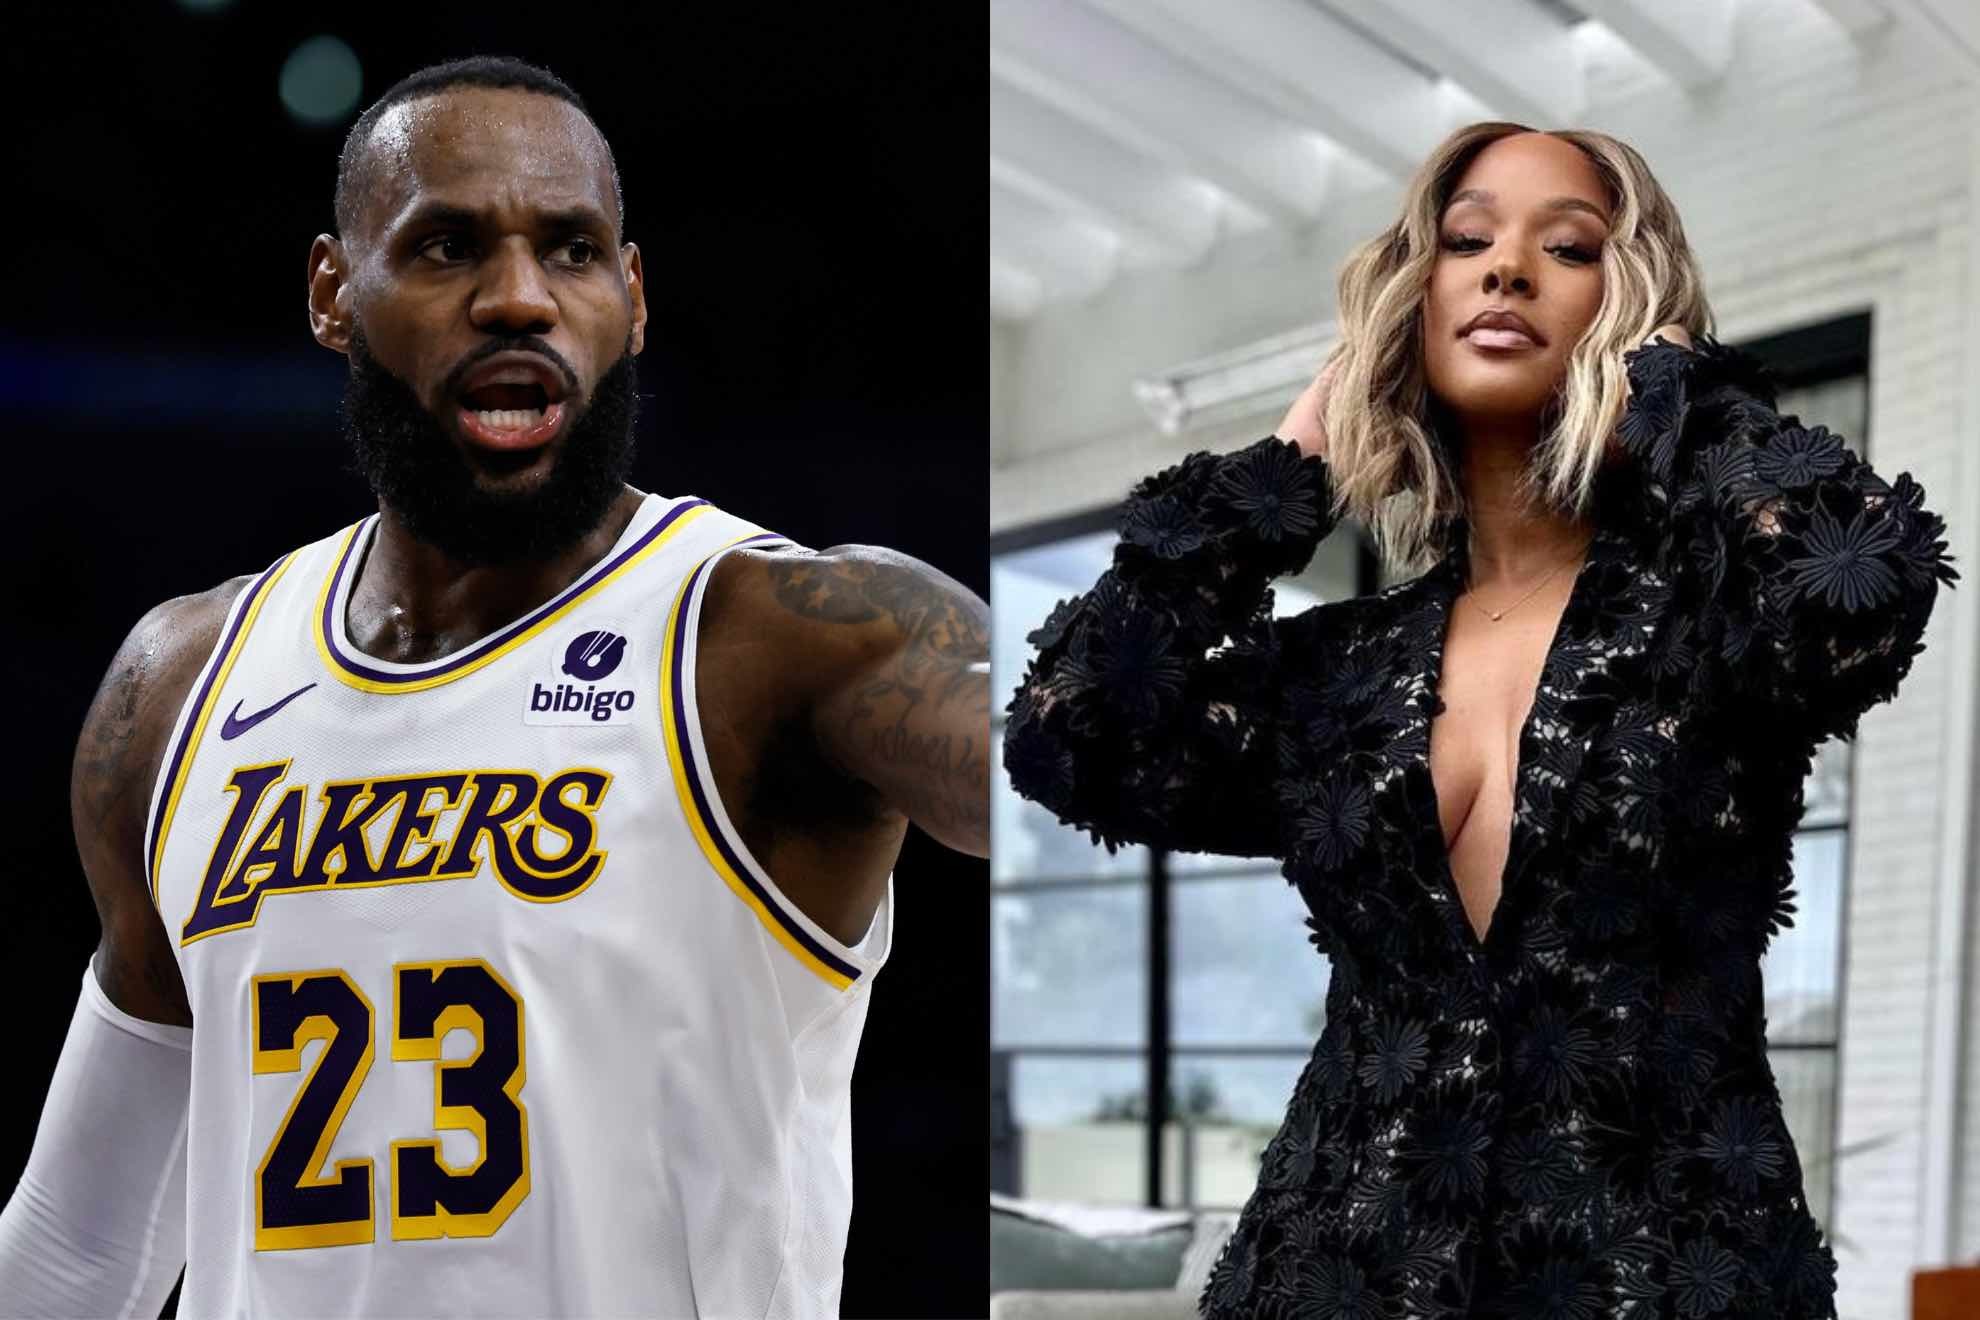 LeBron James needs his wife Savannah to help him relax after games